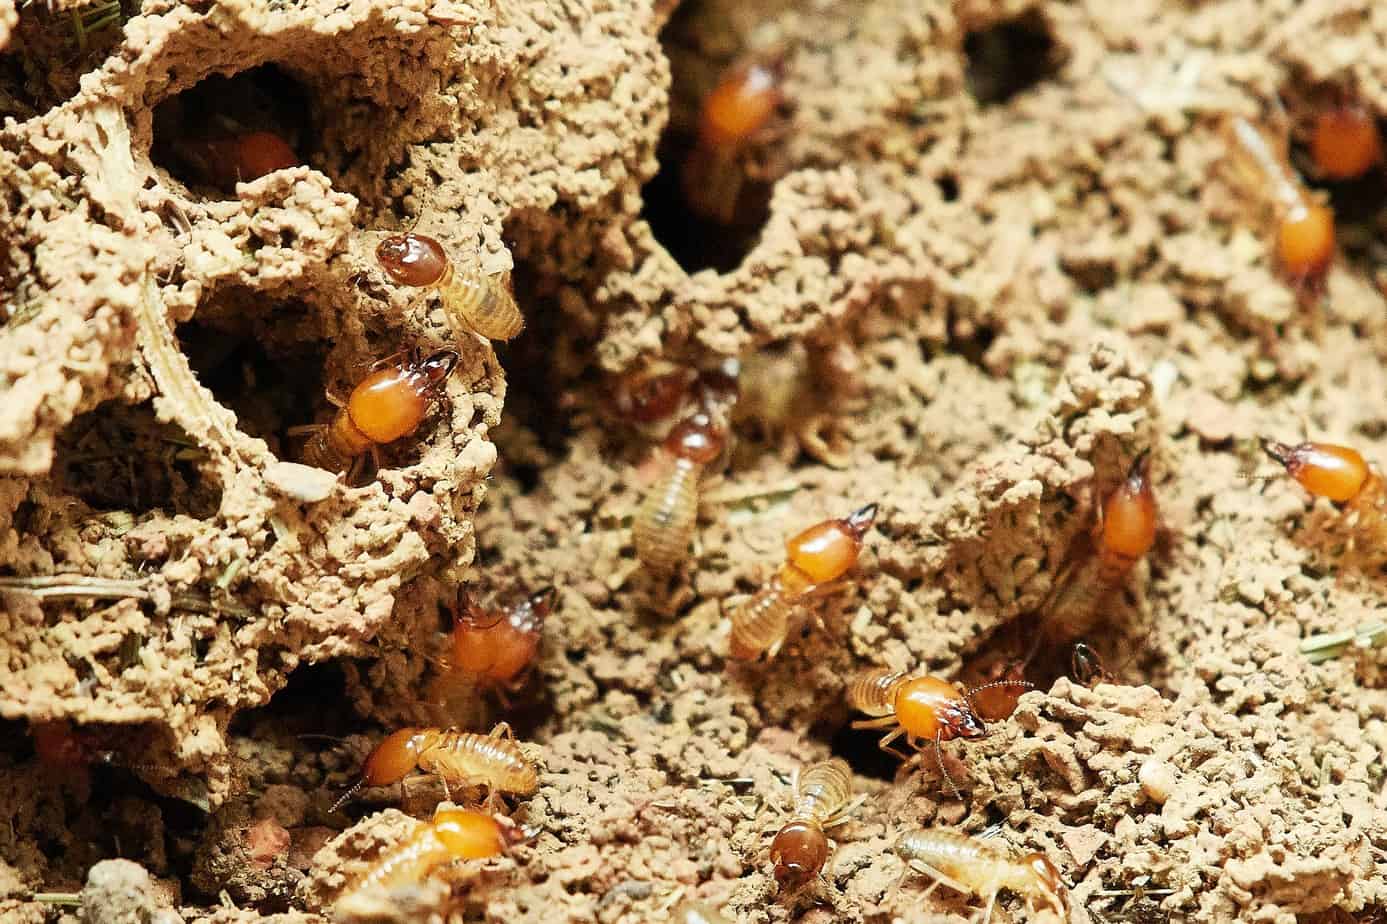                               4000 year old Termite ‘Biological Wonders’ Mounds Found in Brazil                             
                              